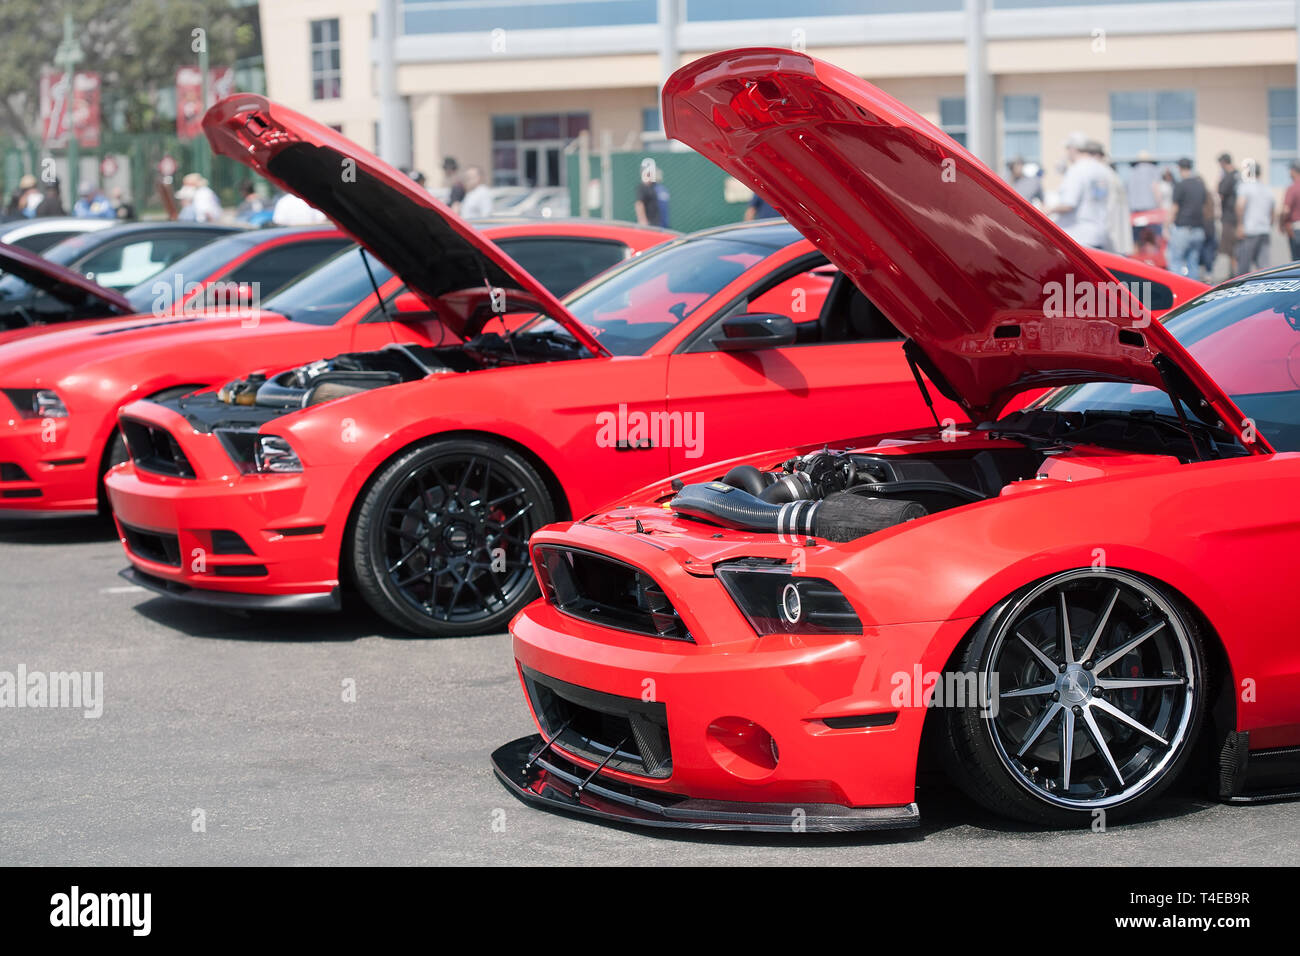 Red ford mustangs with custom aftermarket parts on display from the 2019 fabulous fords forever auto show in Anaheim California. Stock Photo